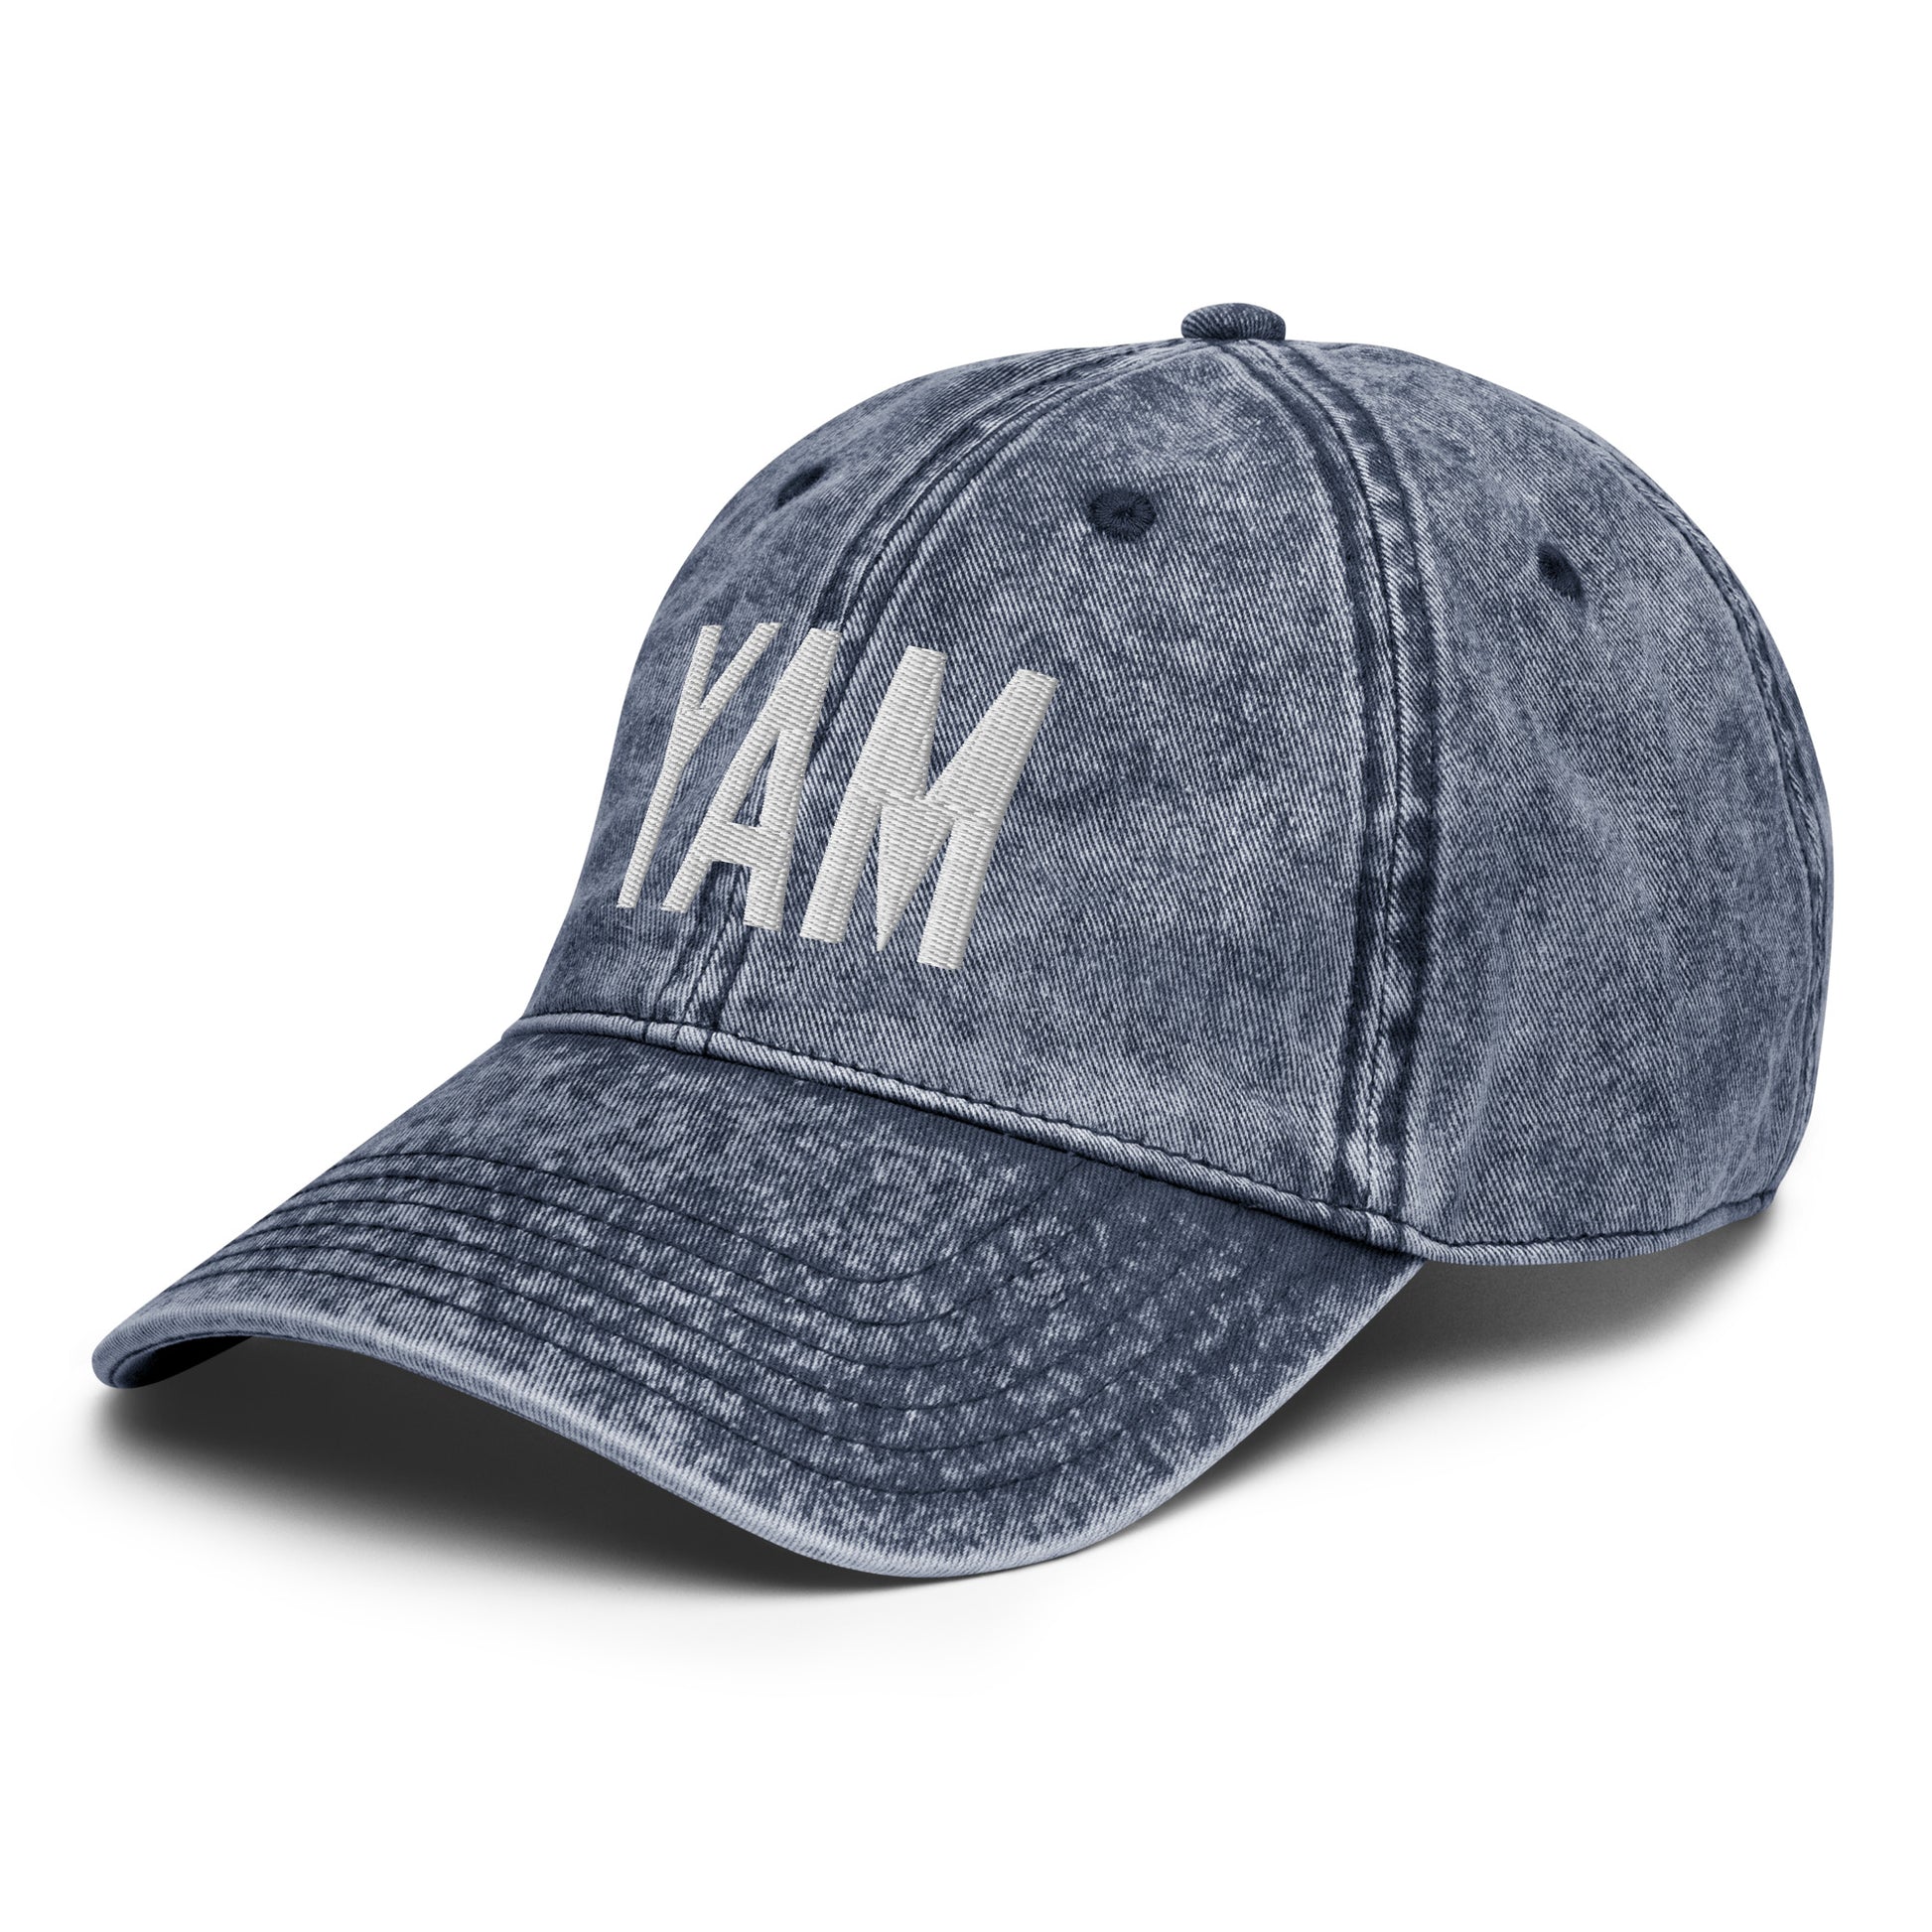 Airport Code Twill Cap - White • YAM Sault-Ste-Marie • YHM Designs - Image 17